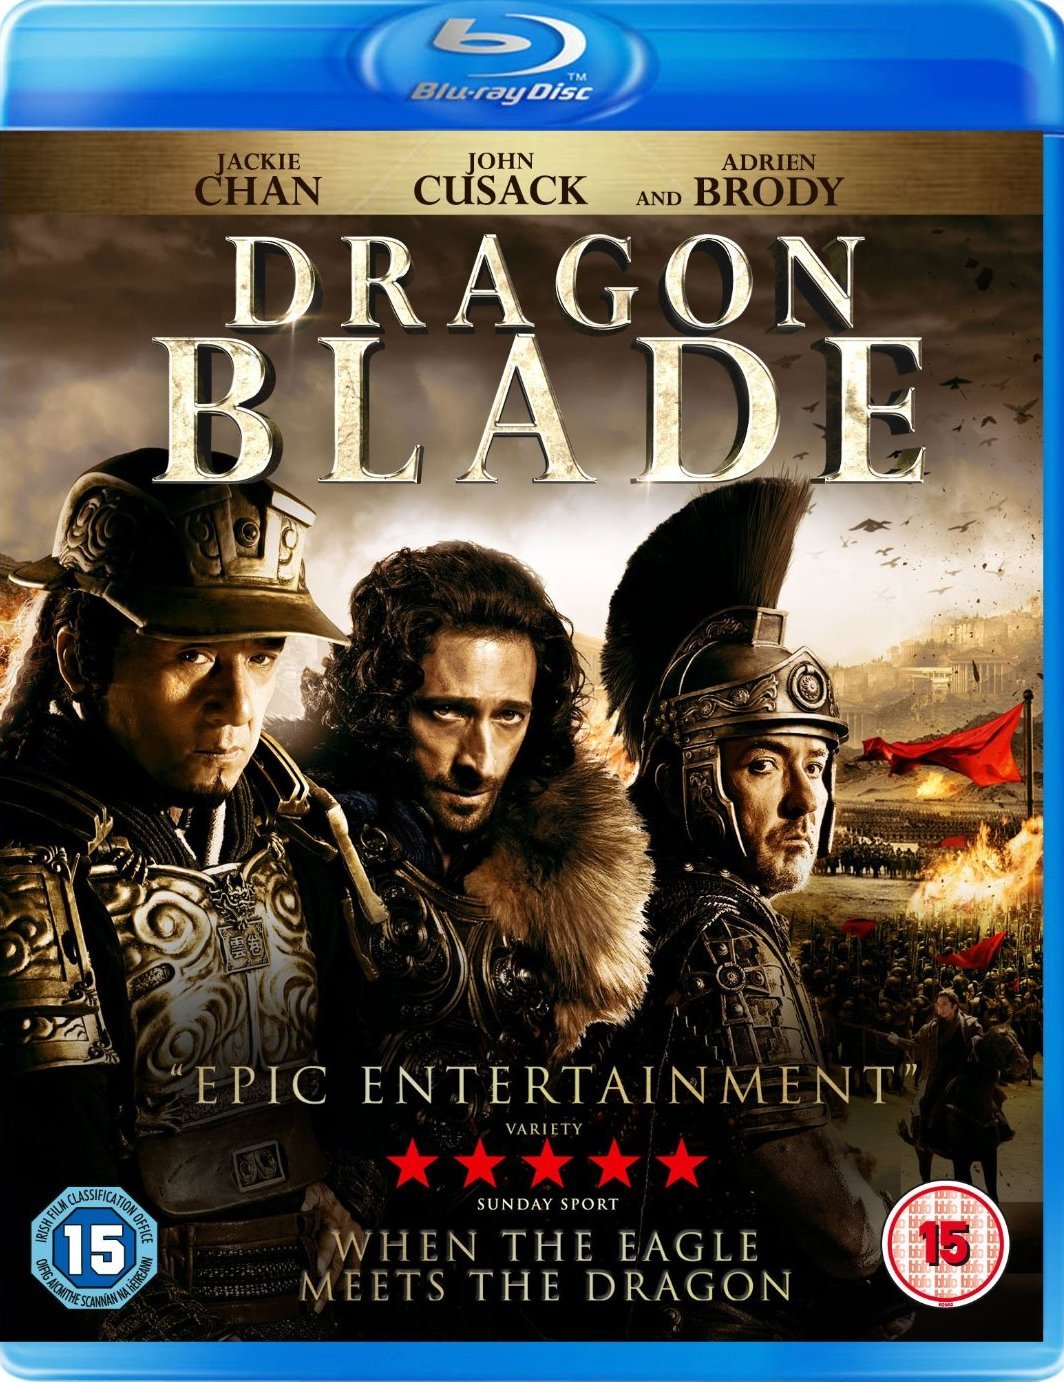 Film review: Jackie Chan's Dragon Blade